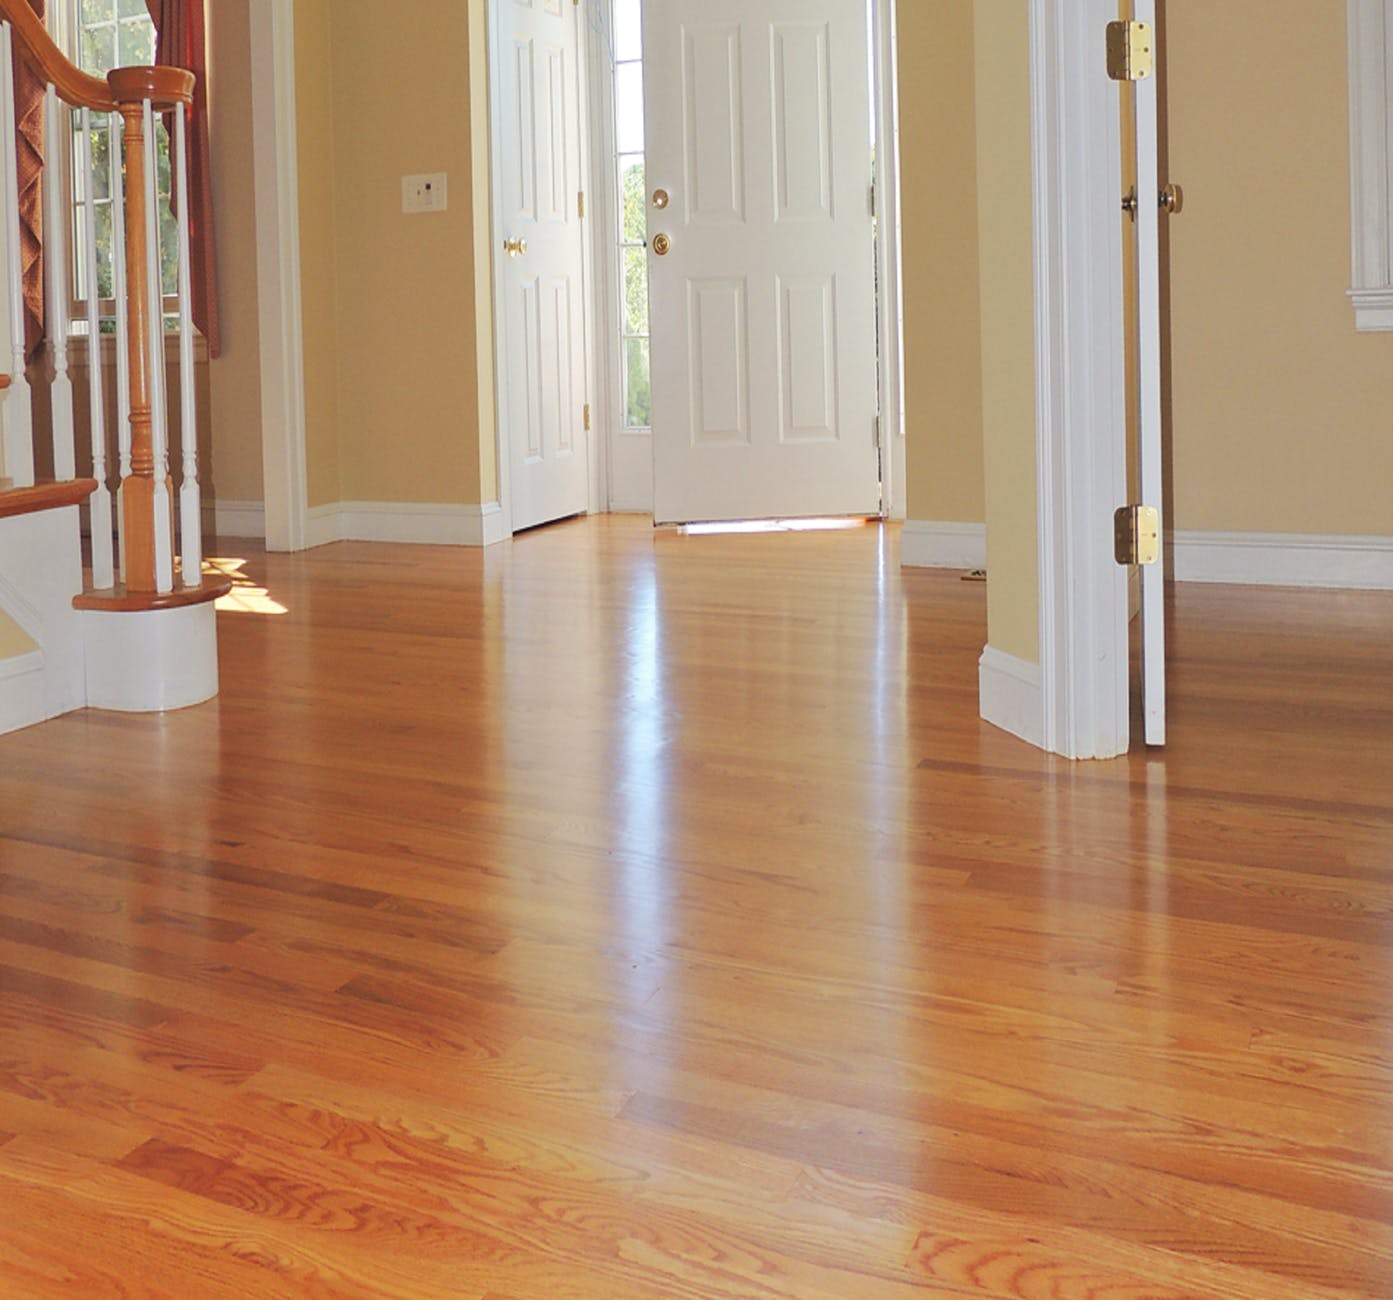 A home interior with hardwood floor